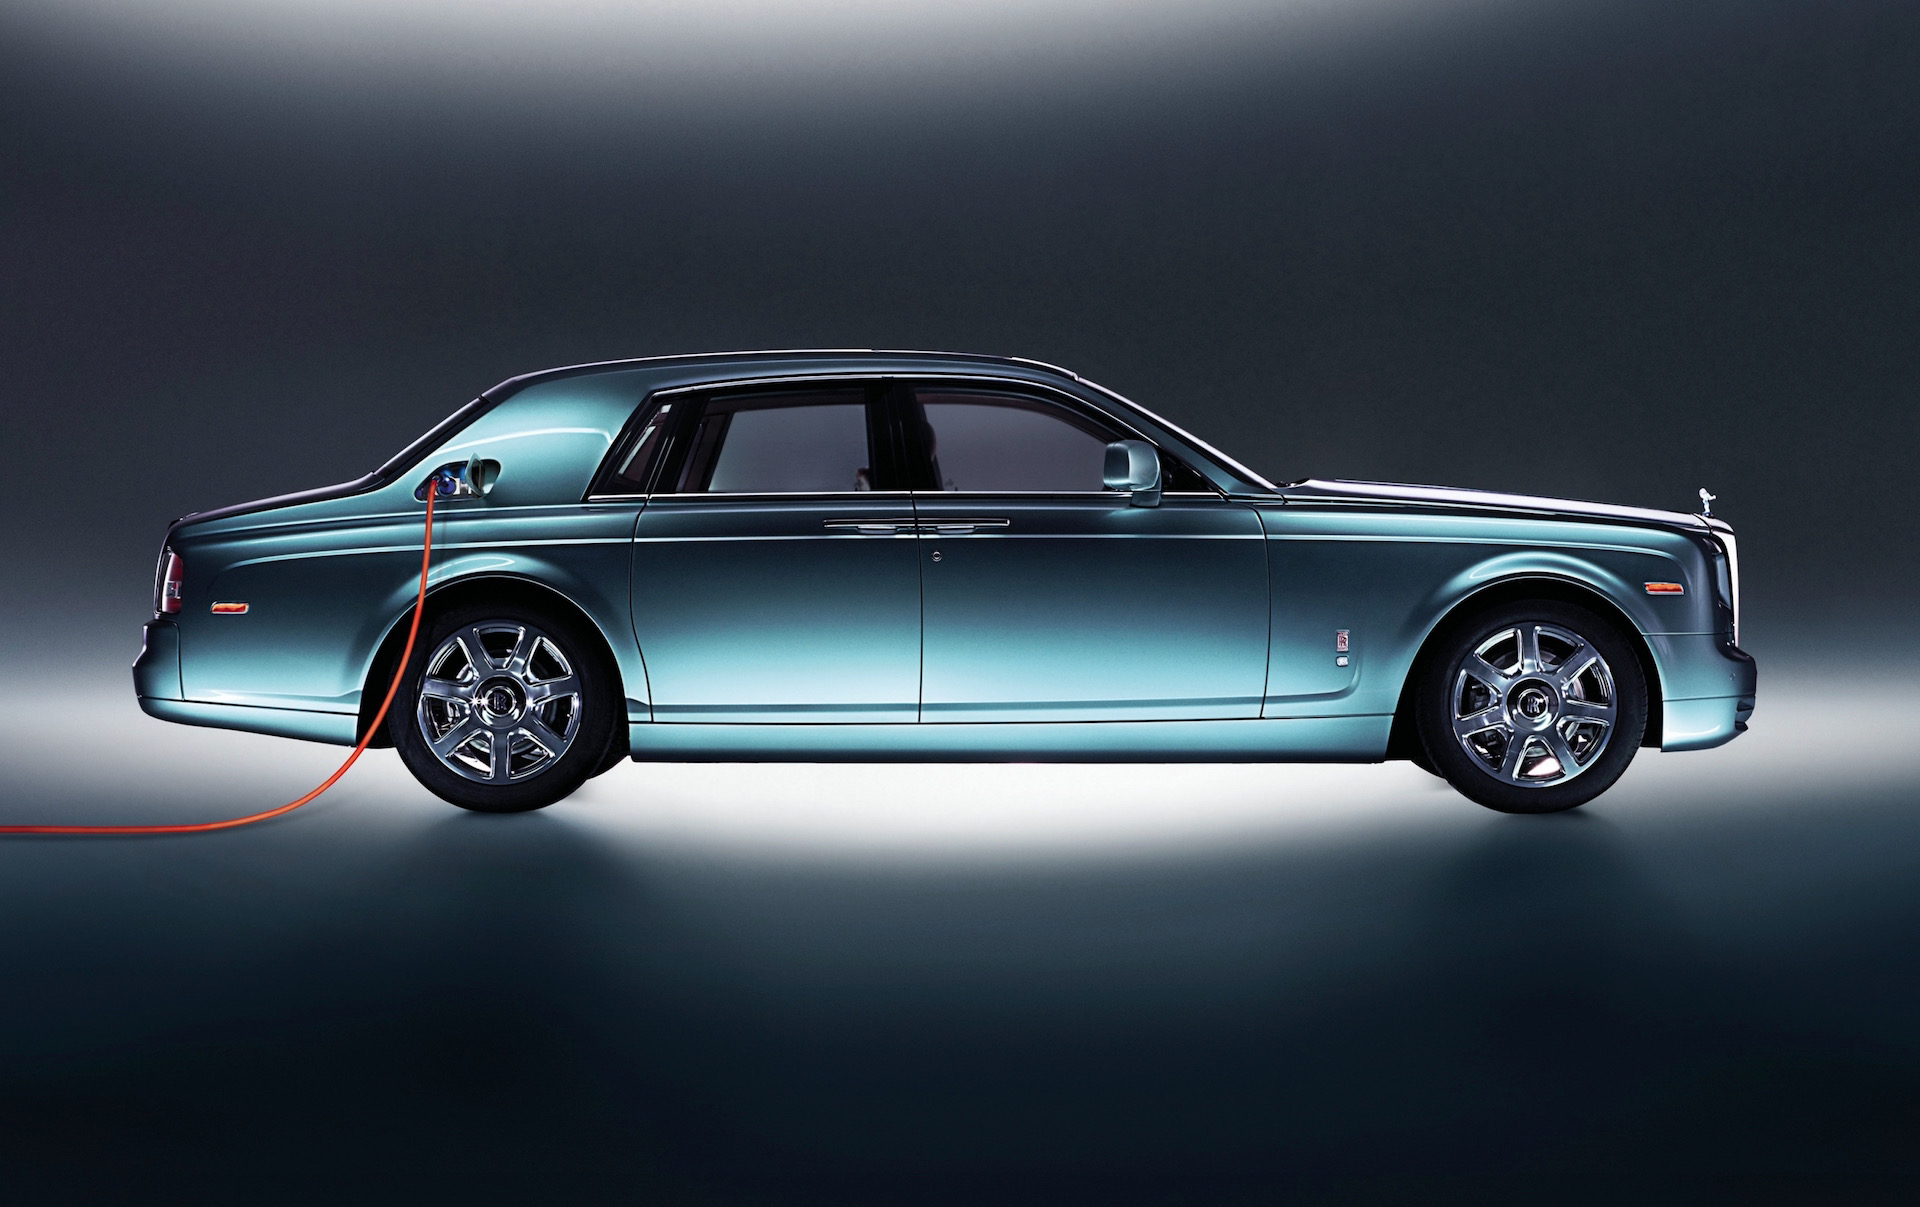 Rolls-Royce to unveil electric vehicle plans, will introduce EV this decade